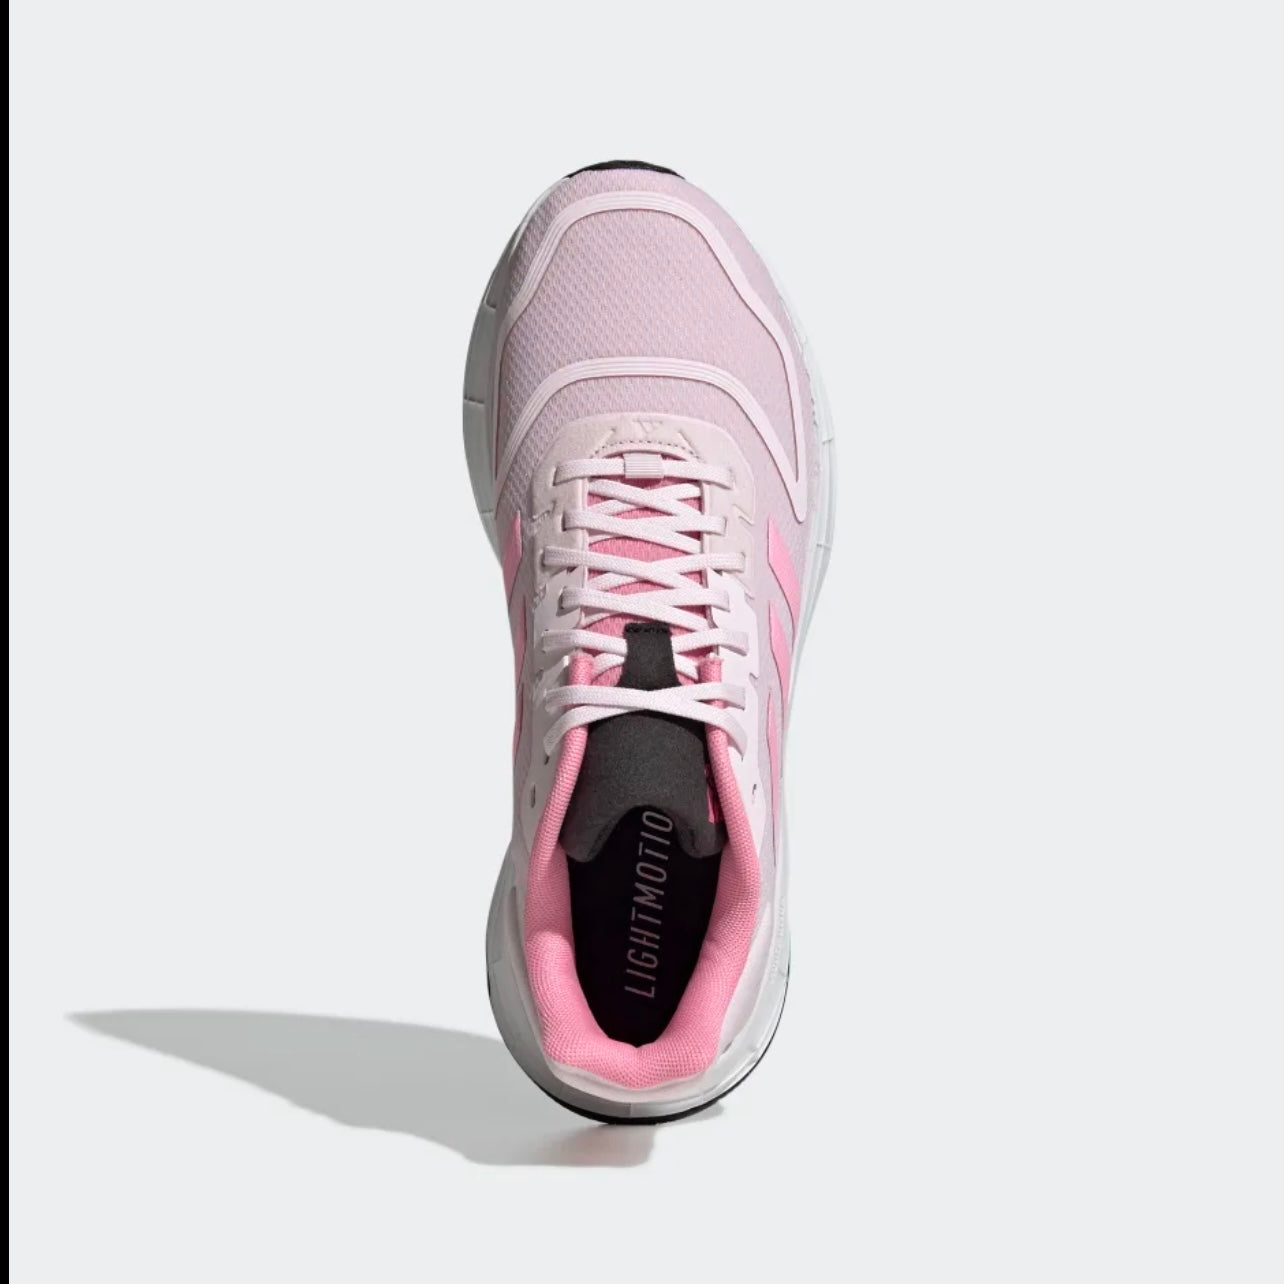 Adidas running for woman in pink